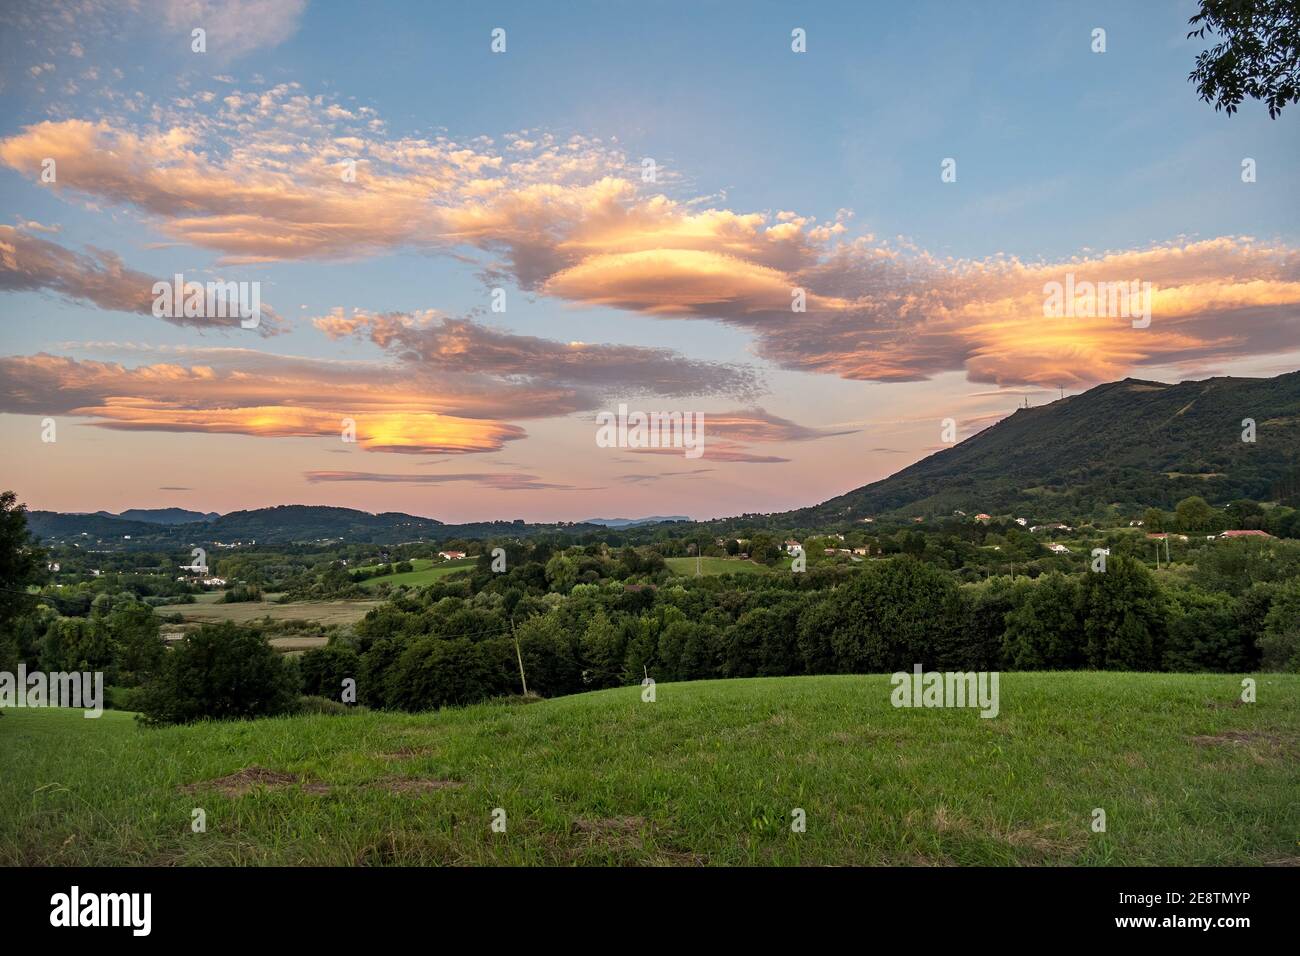 Amazing colorful lenticular clouds over mountain in countryside. Irun, Basque Country, Spain. Stock Photo